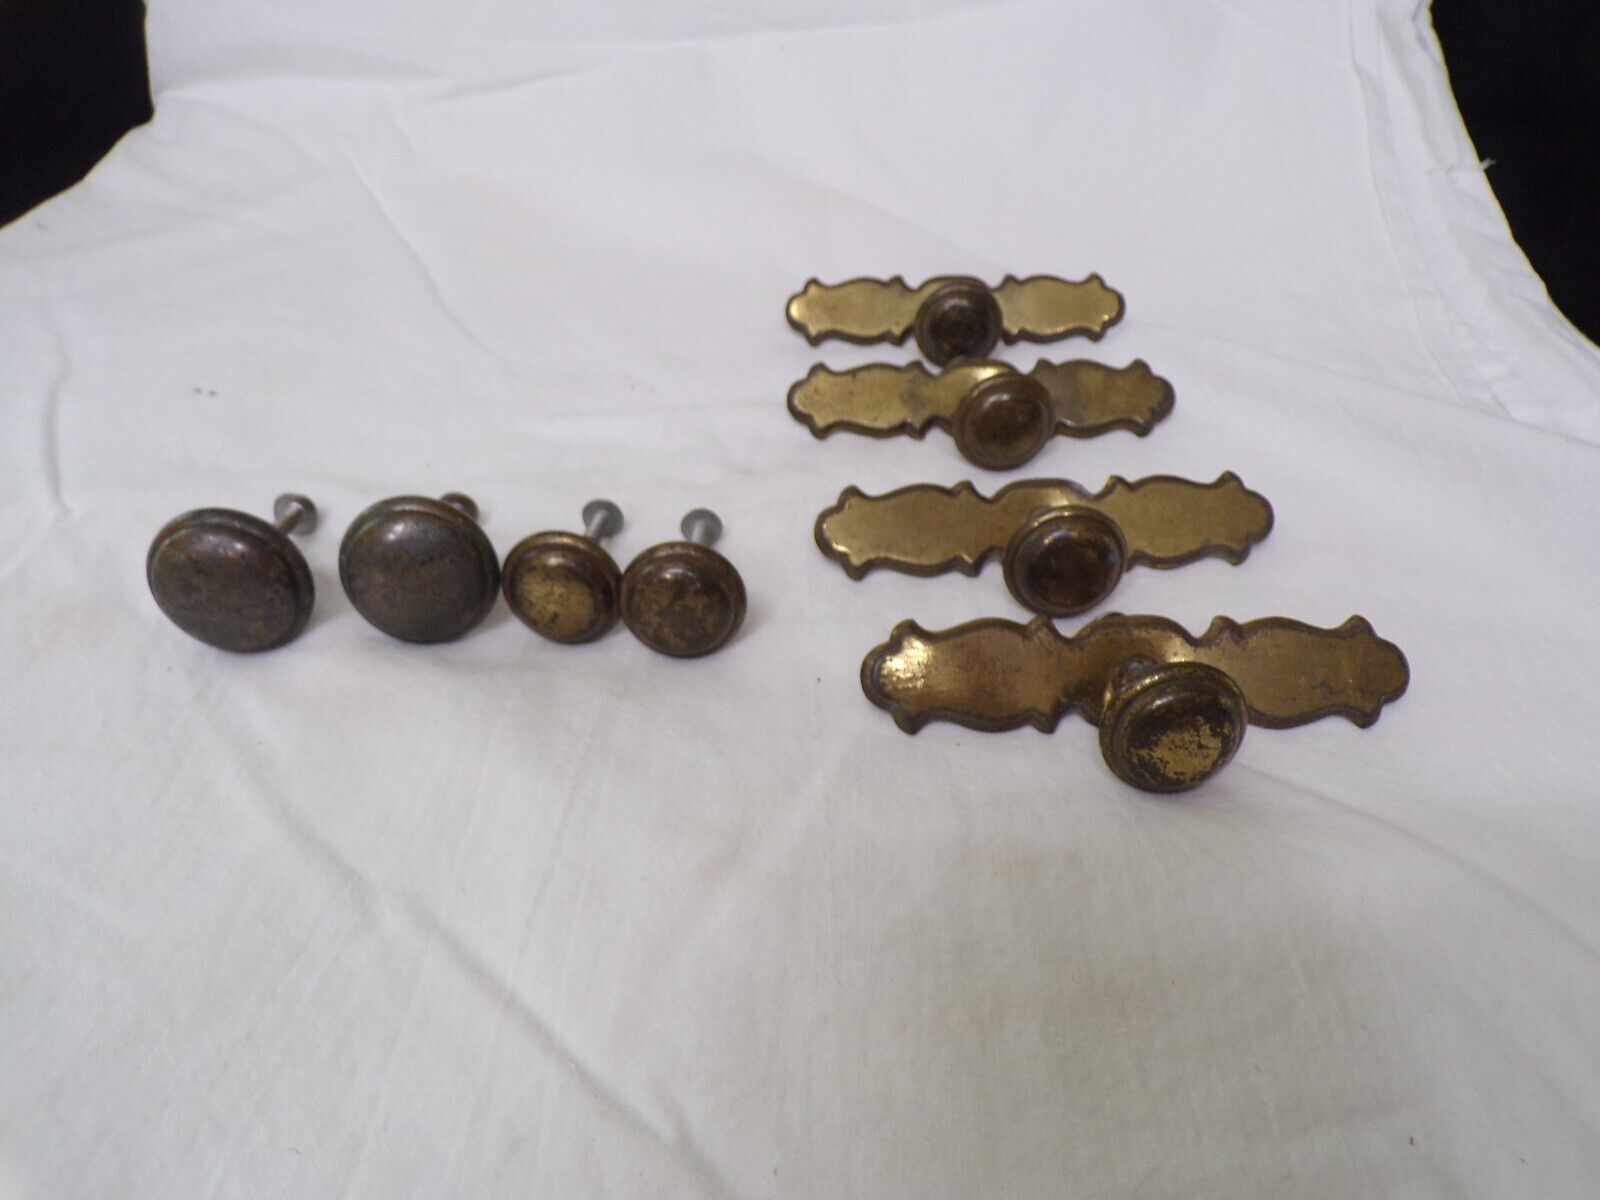 Antique Valuations: Mixed Lot of 4 BPC 20277 1/2 Drawer Pulls and 4 Knobs  Brass